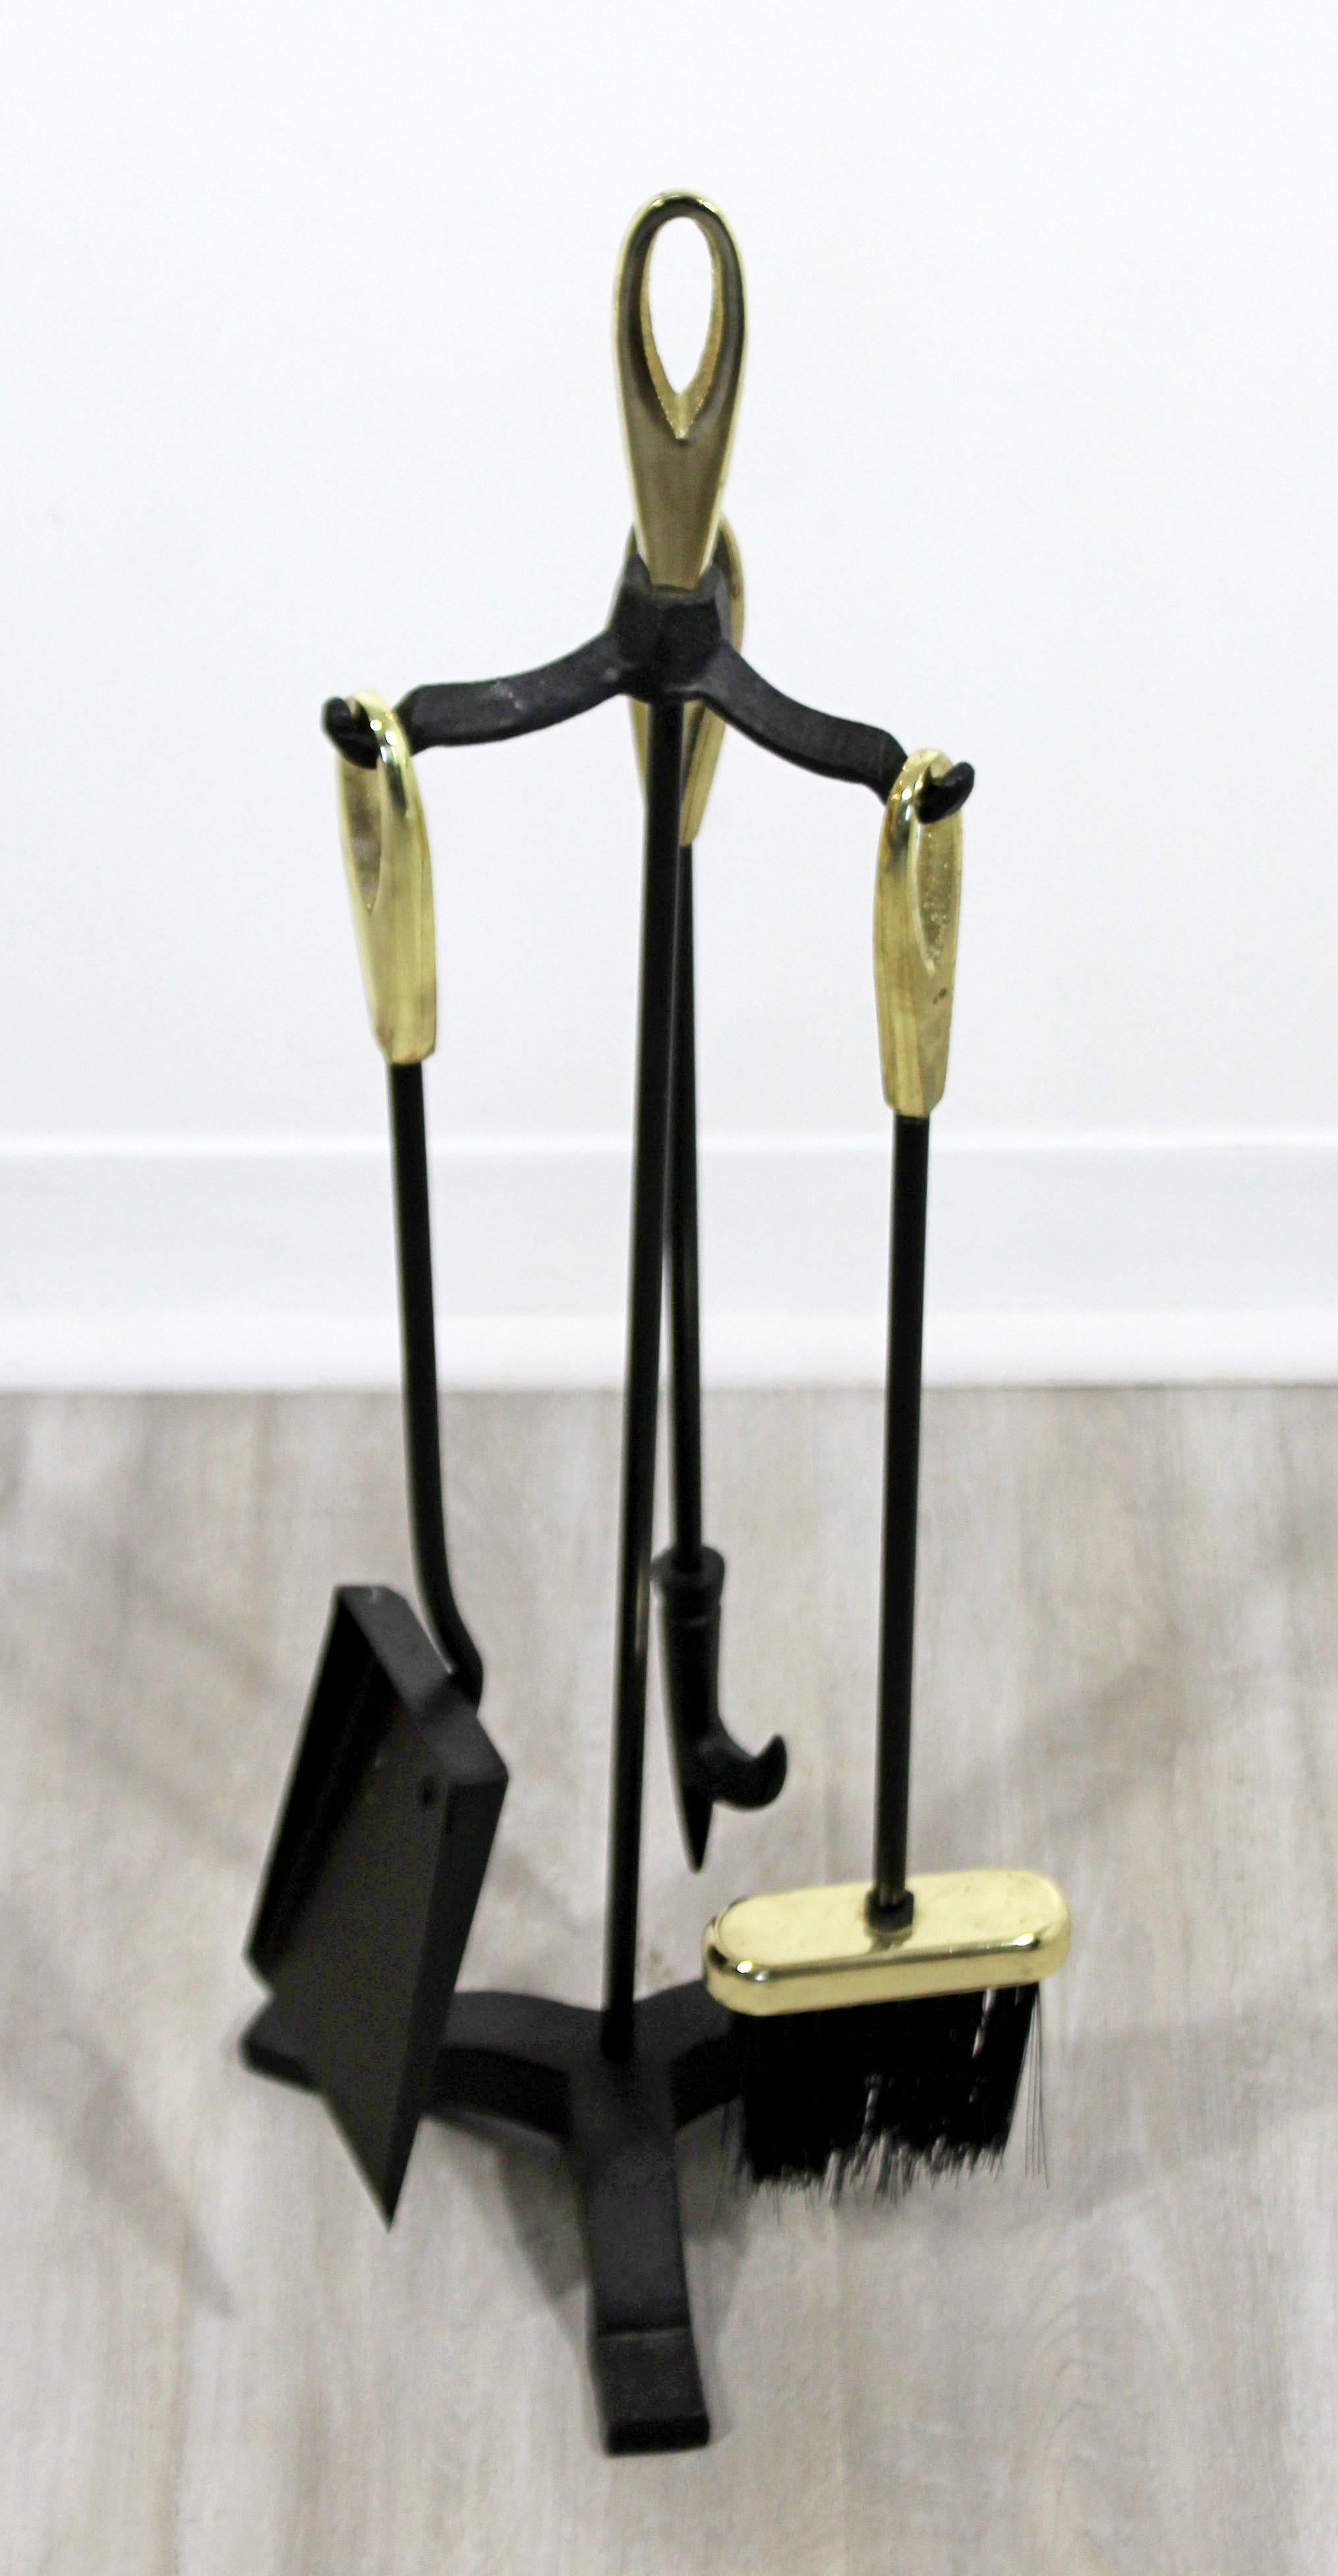 For your consideration is a lovely and petite set of brass & iron fireplace tools, including a shovel, brush and poker, circa 1960s. In very good condition, with a beautiful patina. The dimensions are 9